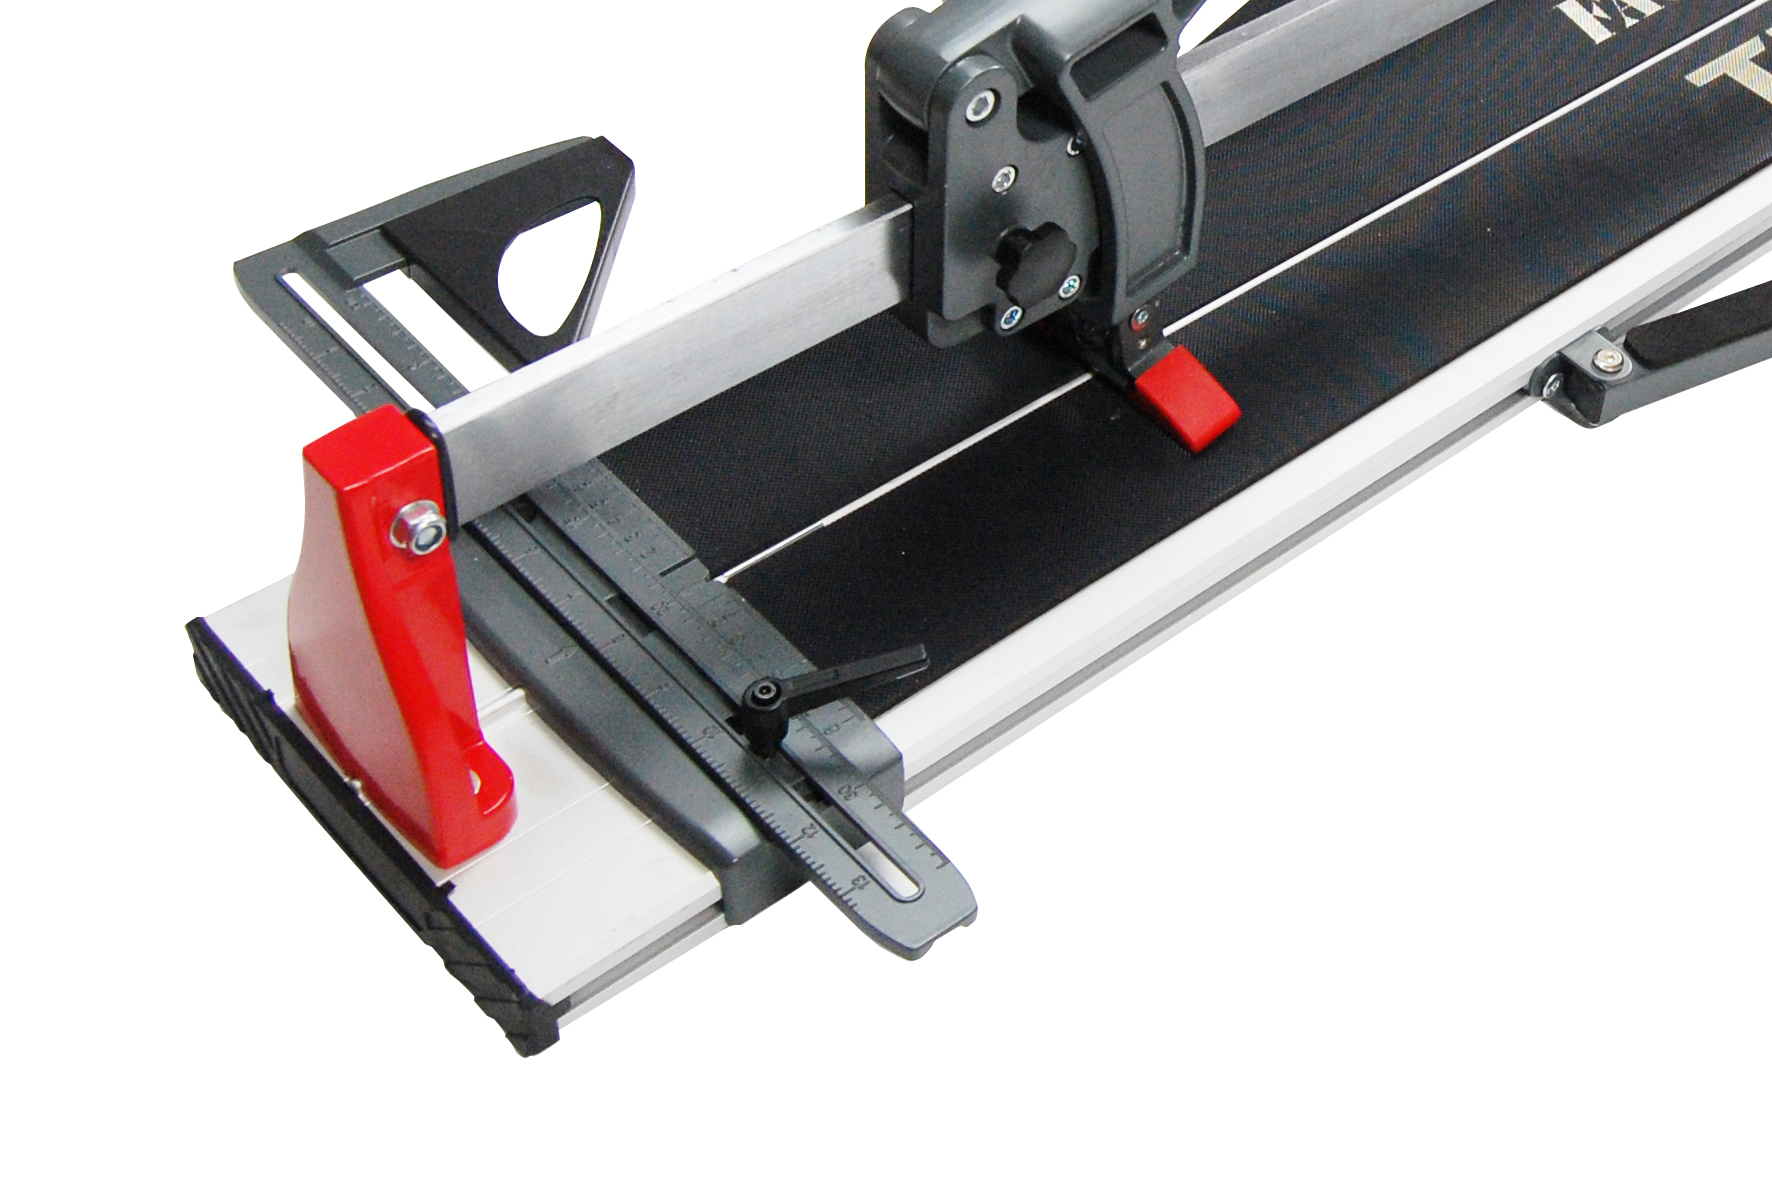 4 Feet Eco Manual Tile Cutter 1200 mm ( 48 inch)